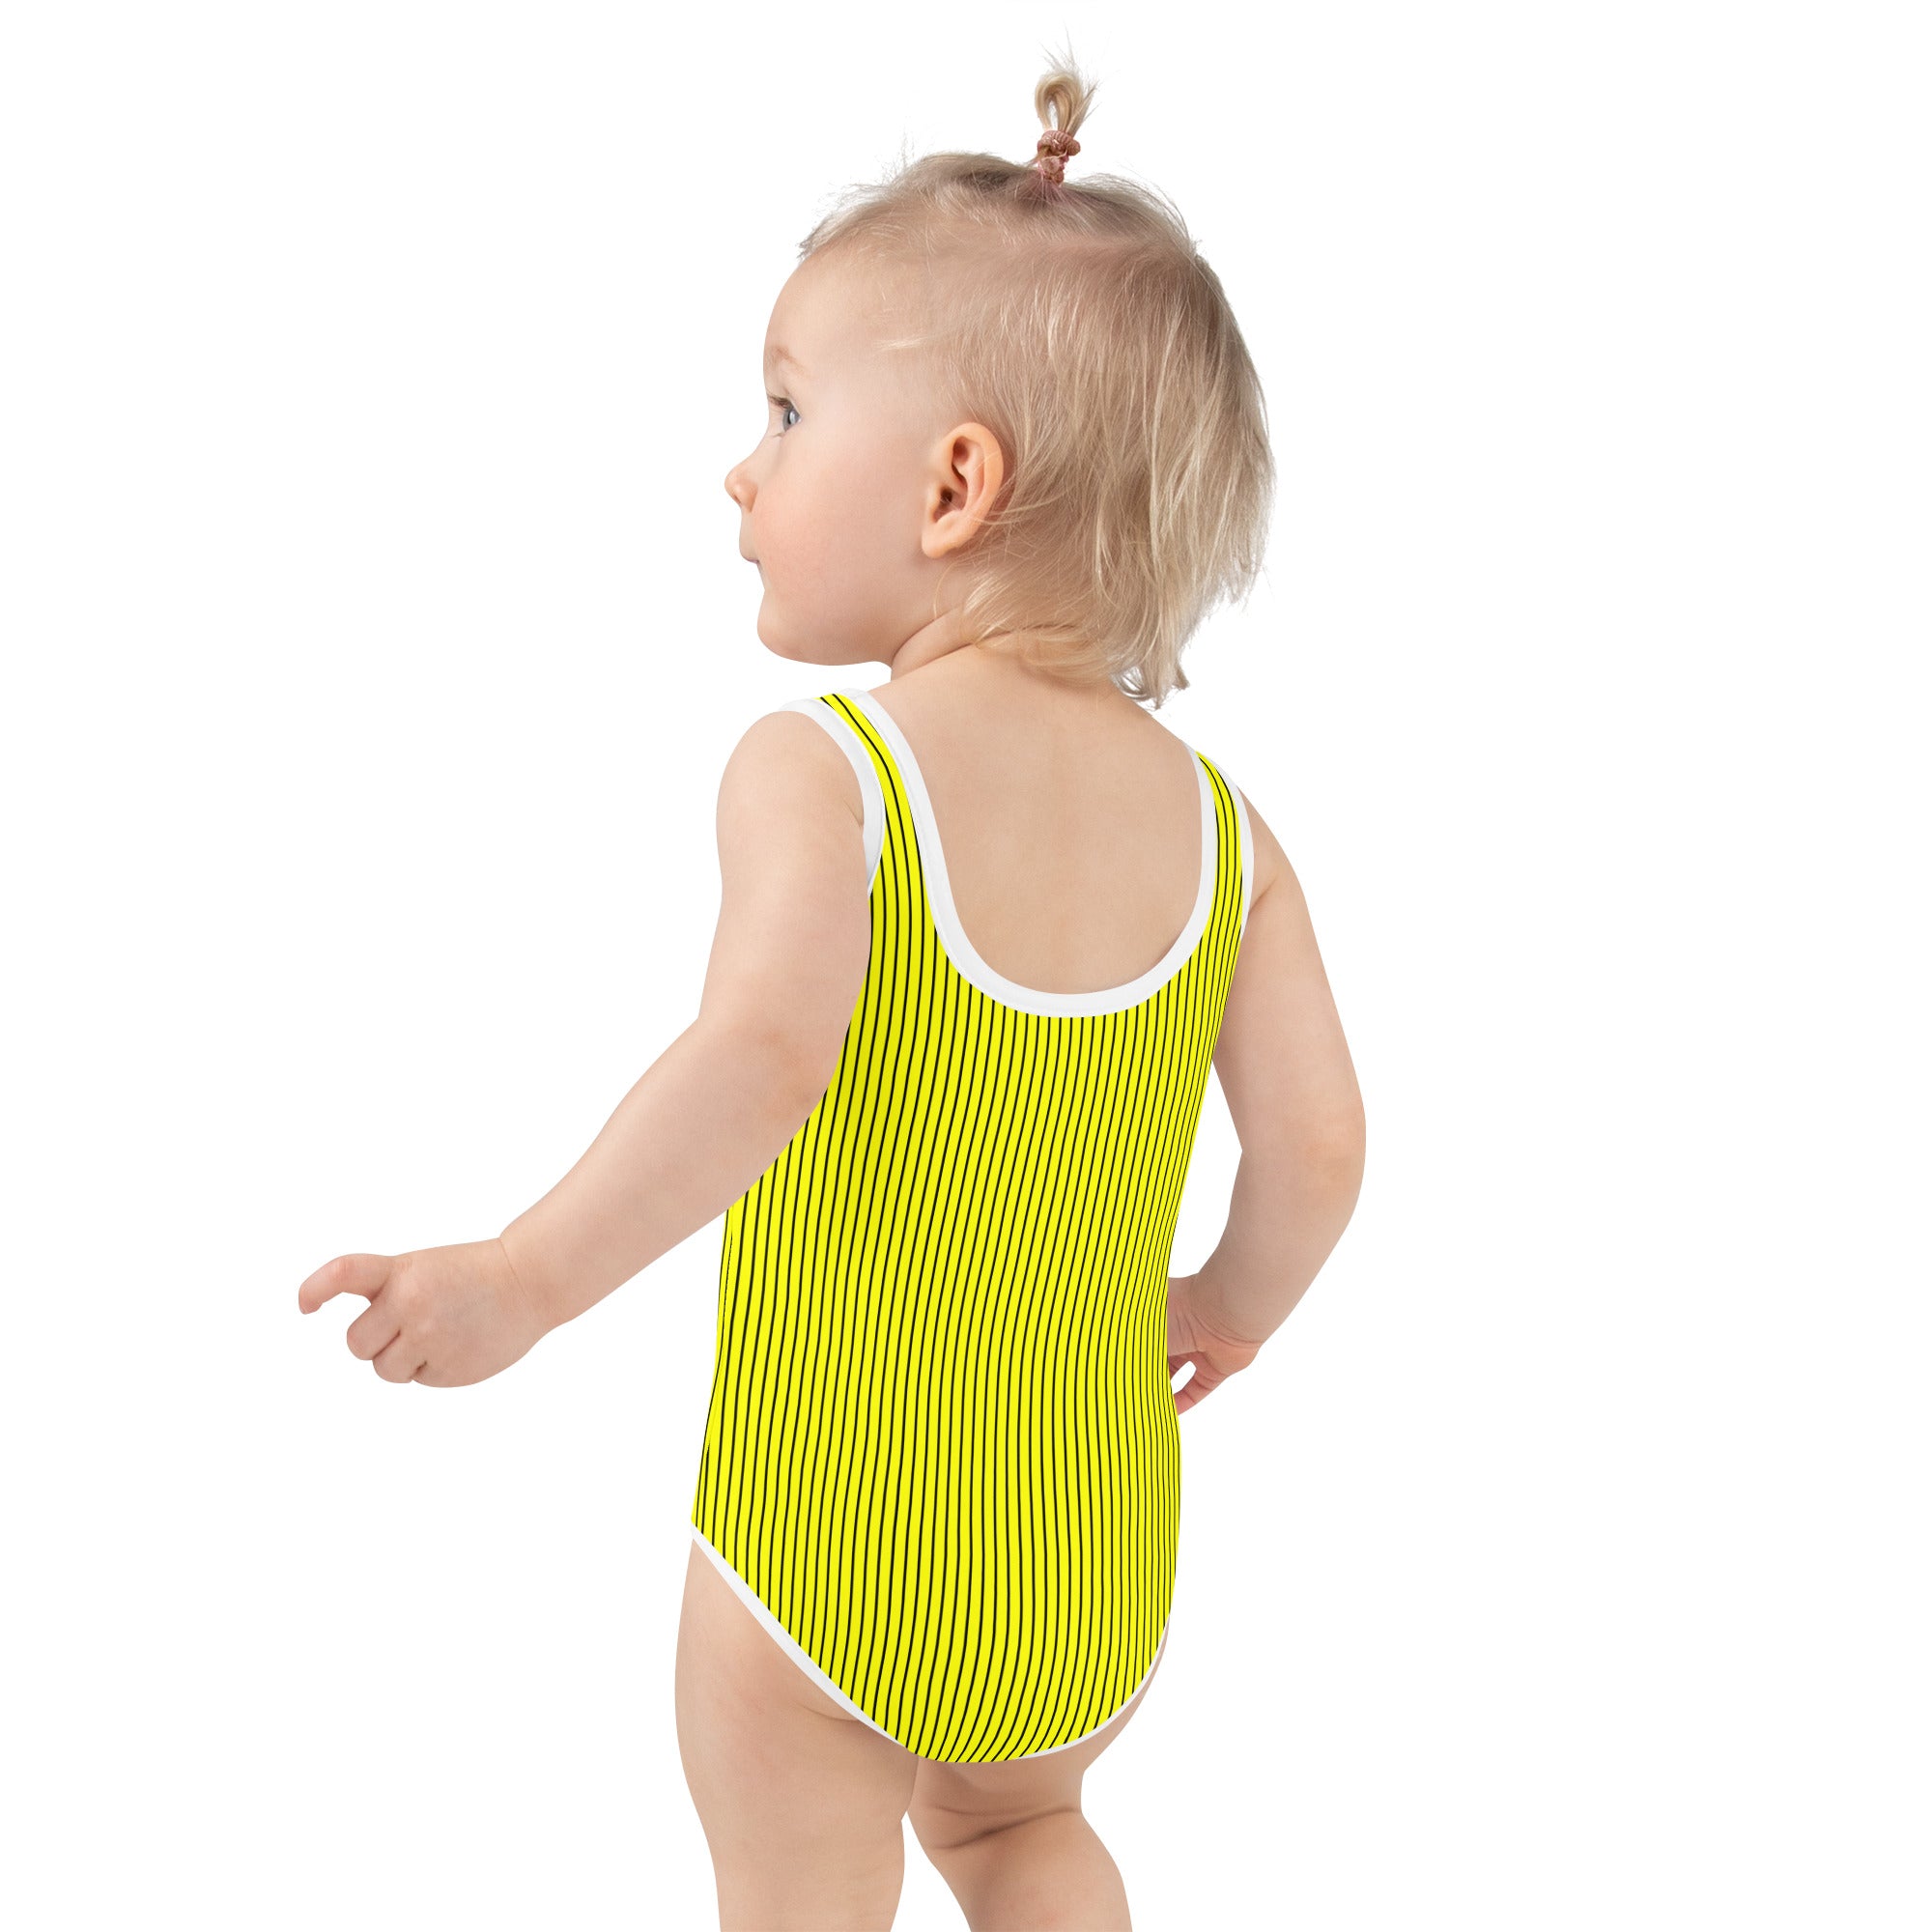 All-Over Print Kids Swimsuit- Yellow with Black Stripes